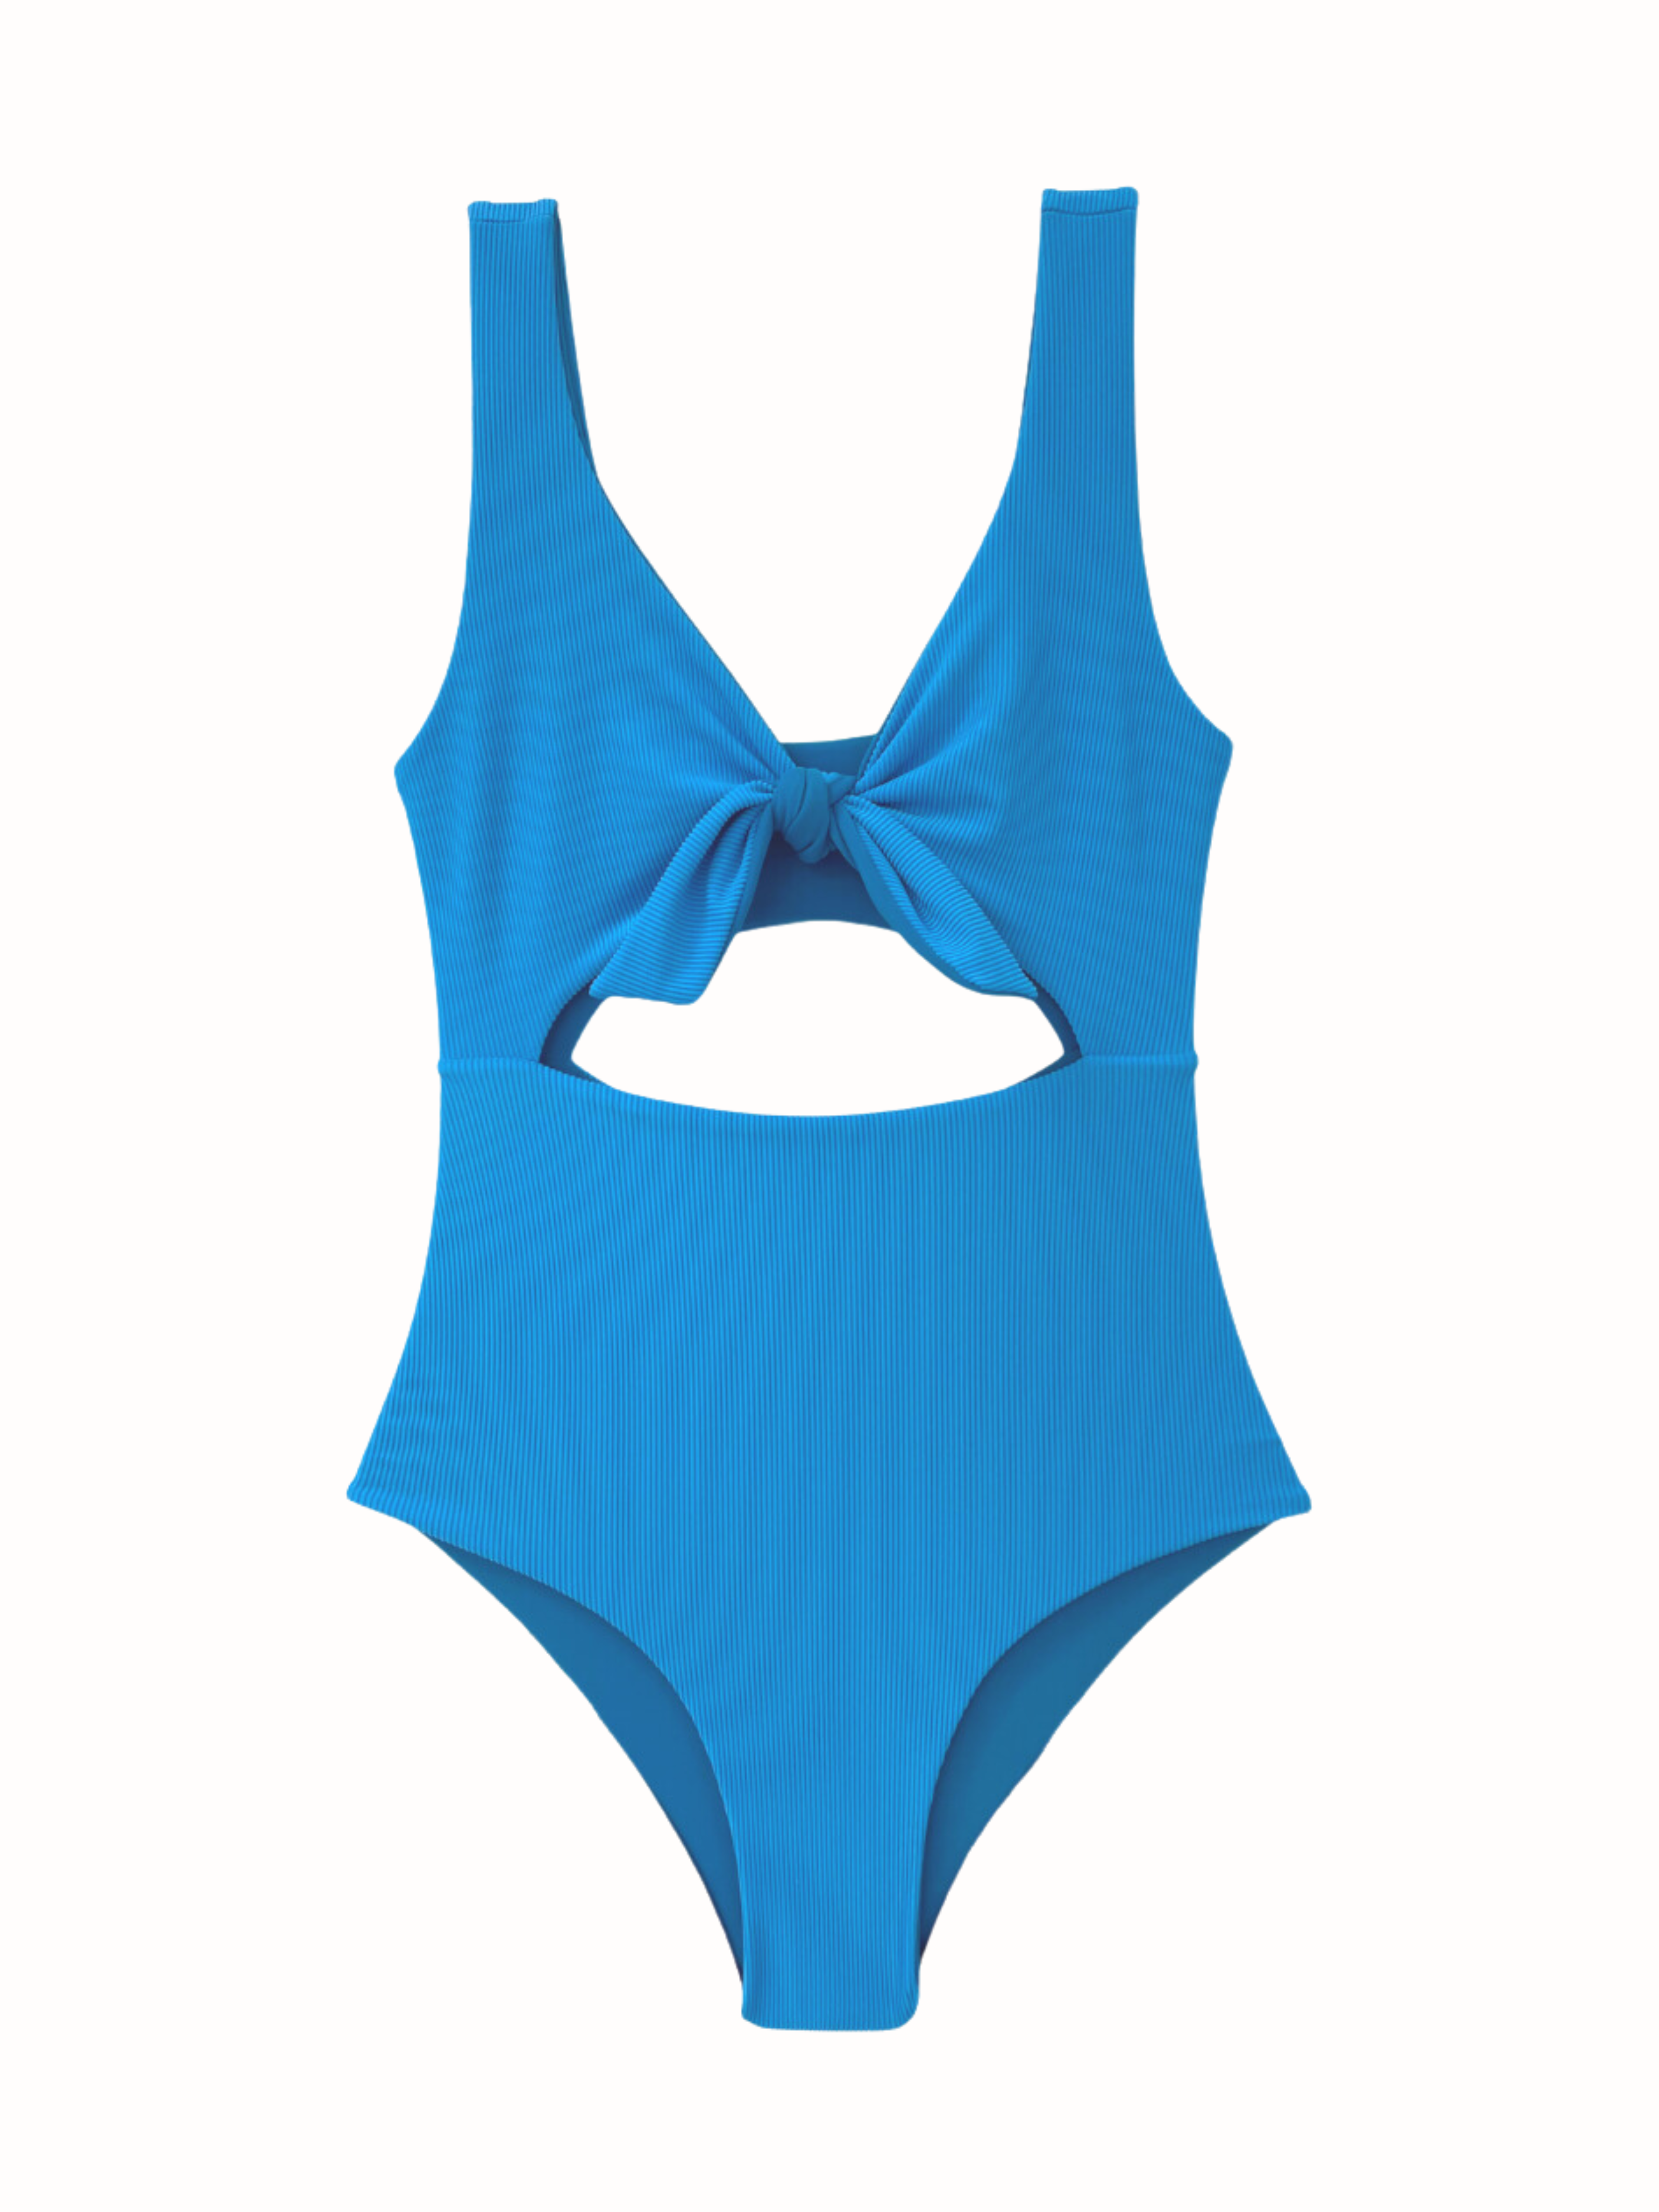 Definition & Meaning of One-piece swimsuit